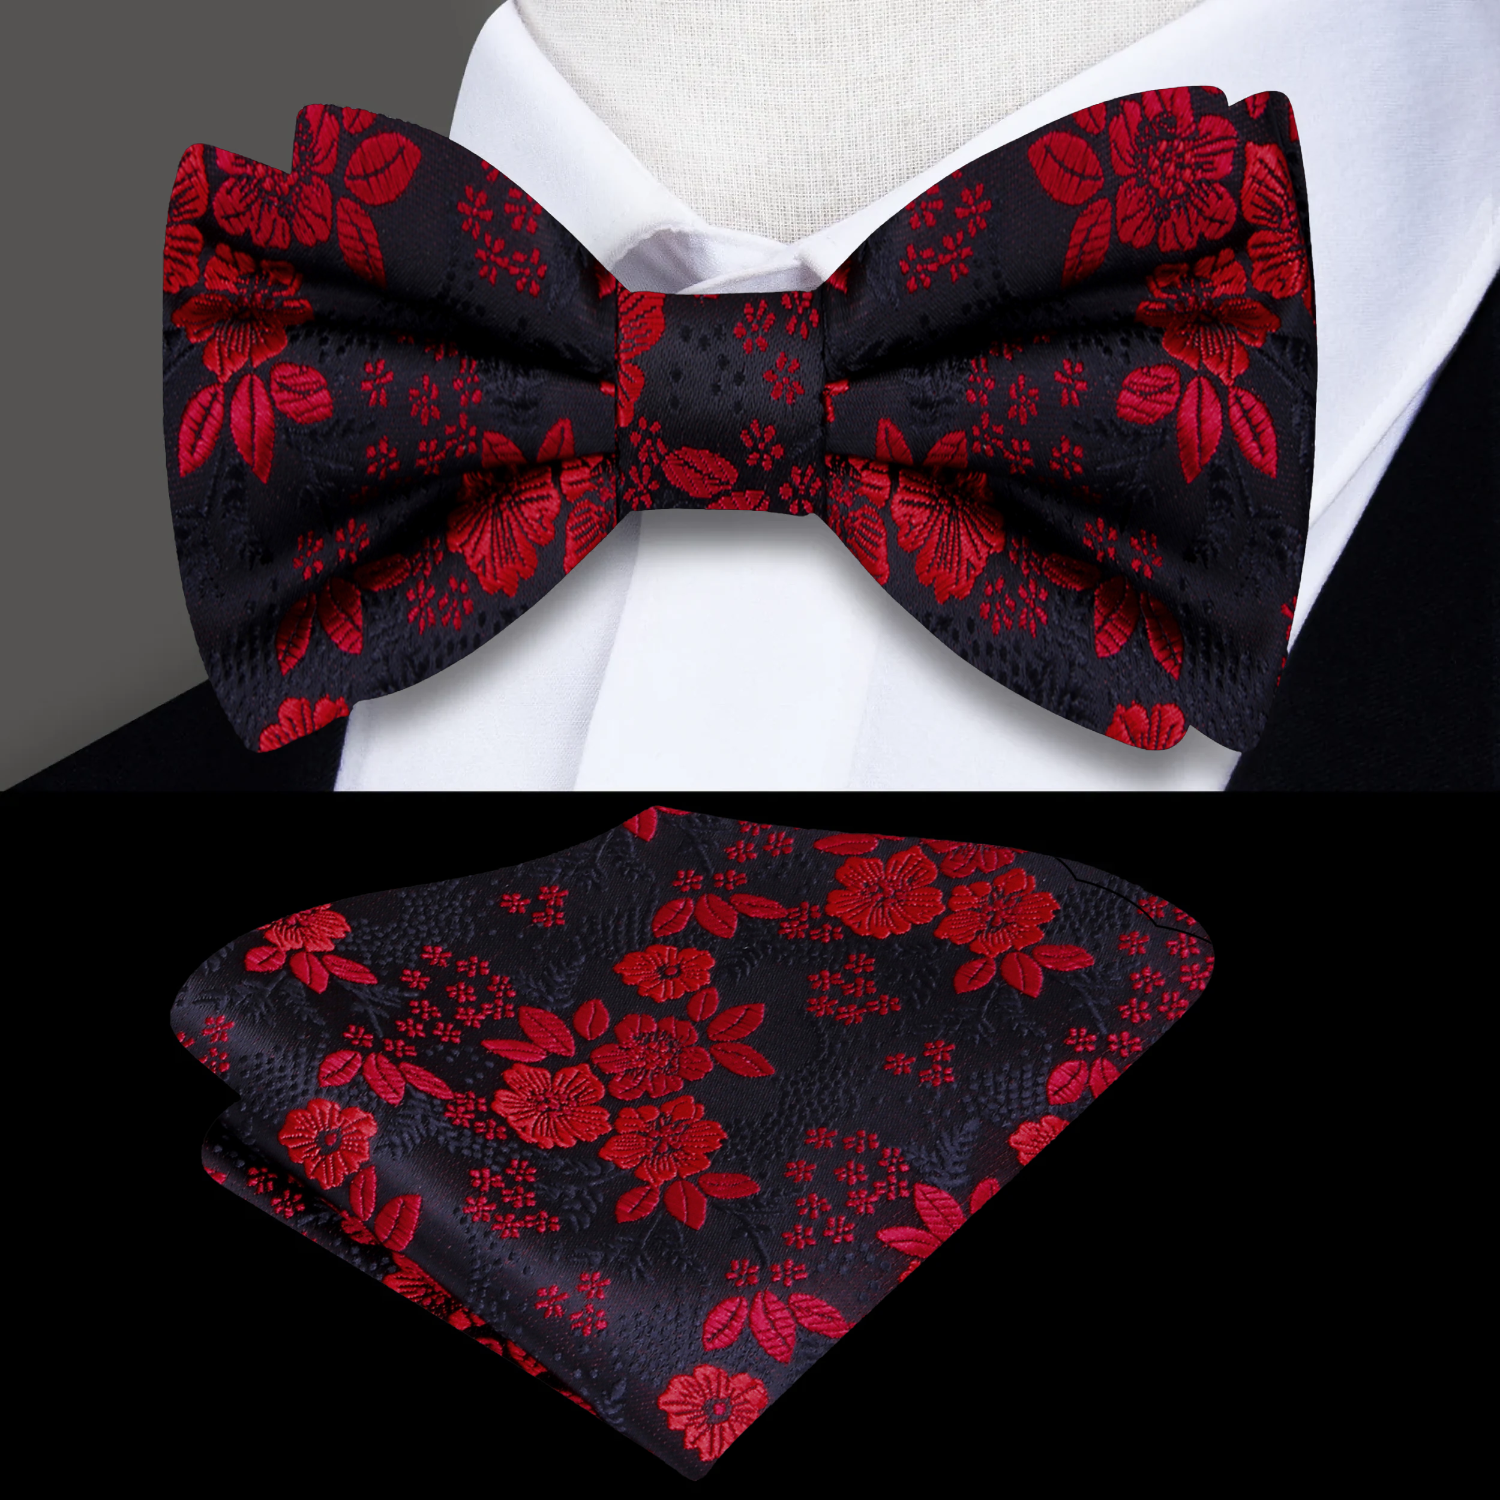 Main View: Black, Red Flowers Bow Tie and Pocket Square||Black, Red